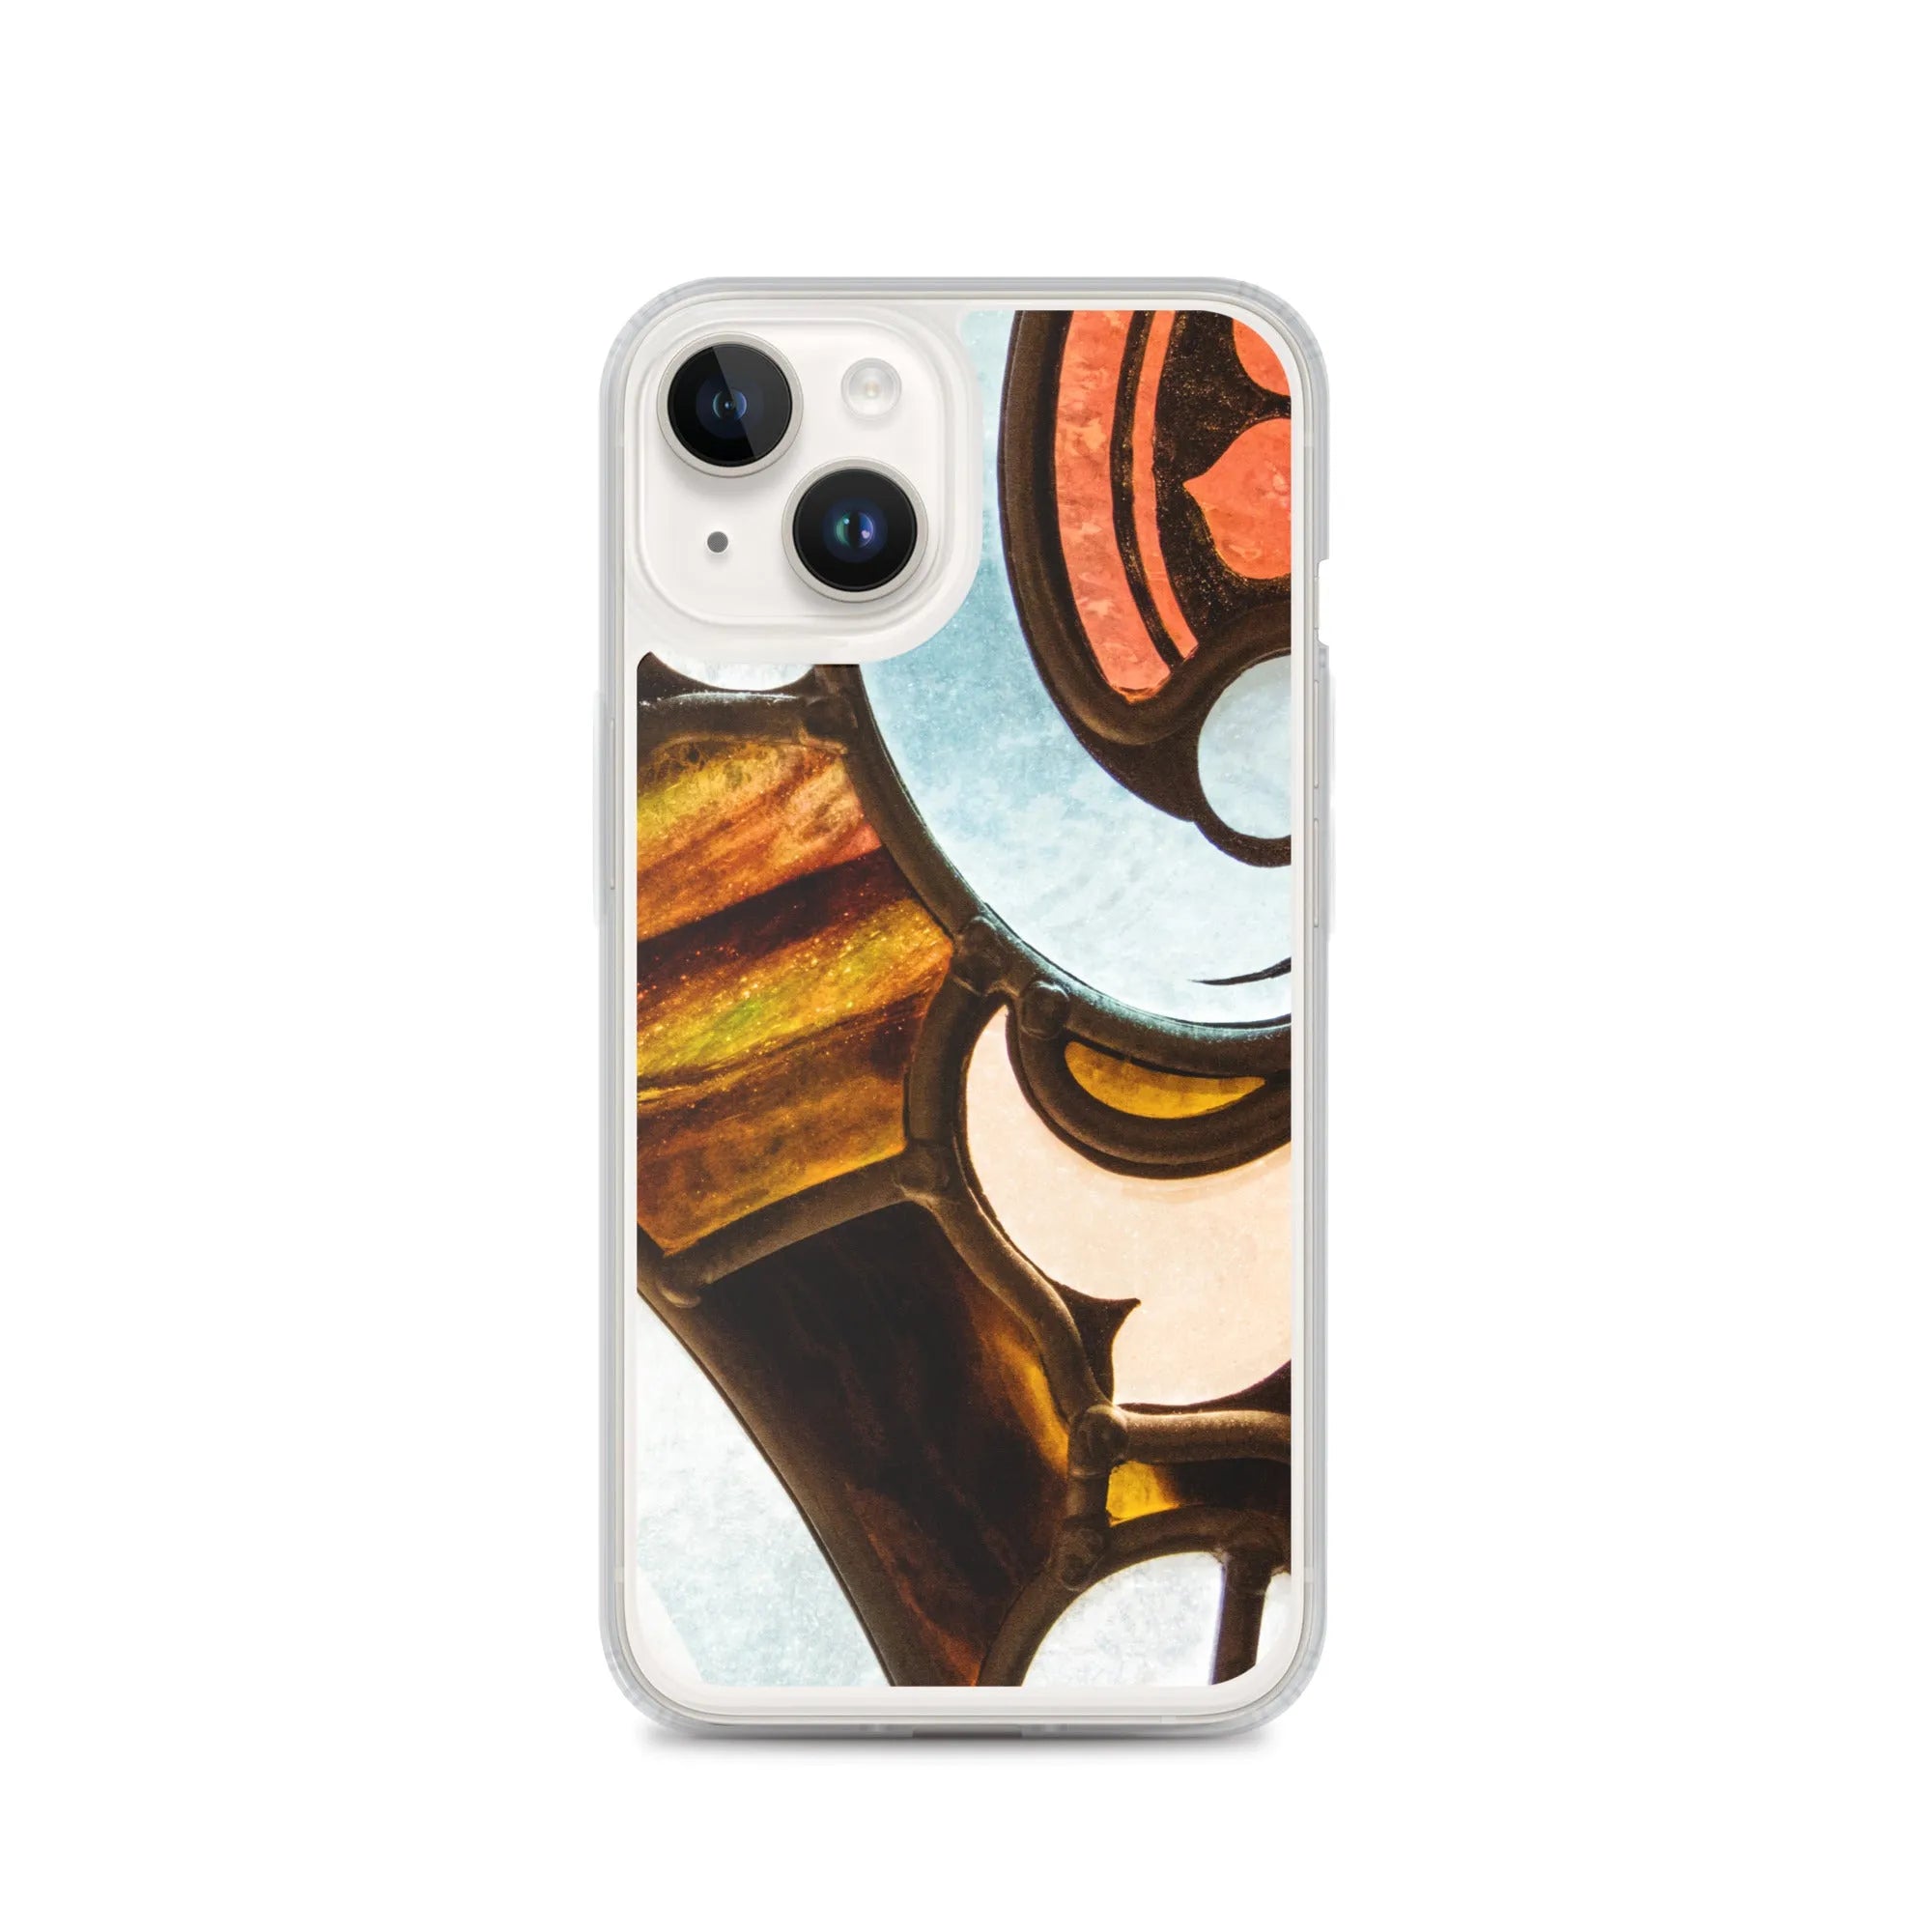 Stay Glassy - Designer Travels Art Iphone Case - Iphone 14 - Mobile Phone Cases - Aesthetic Art